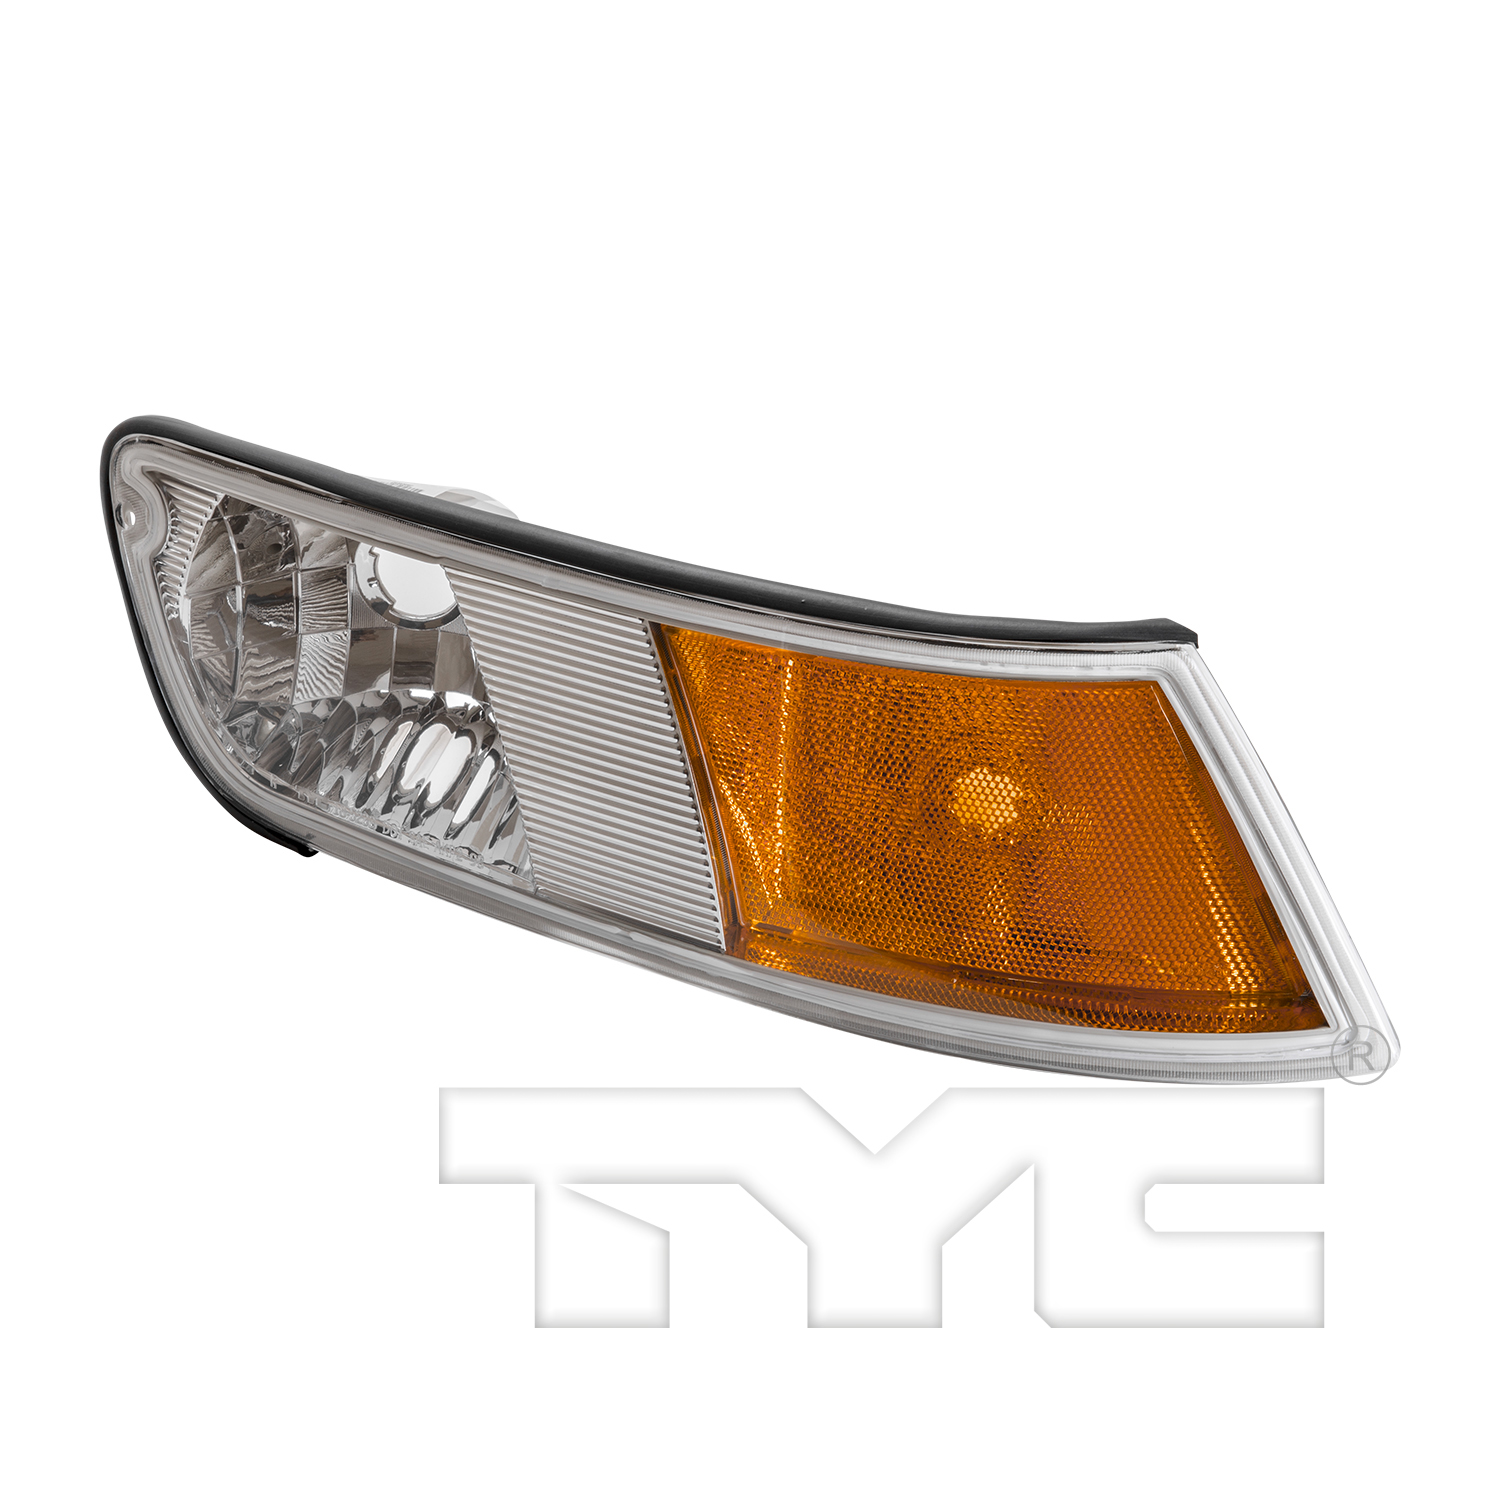 Aftermarket LAMPS for MERCURY - GRAND MARQUIS, GRAND MARQUIS,98-02,RT Front marker lamp assy